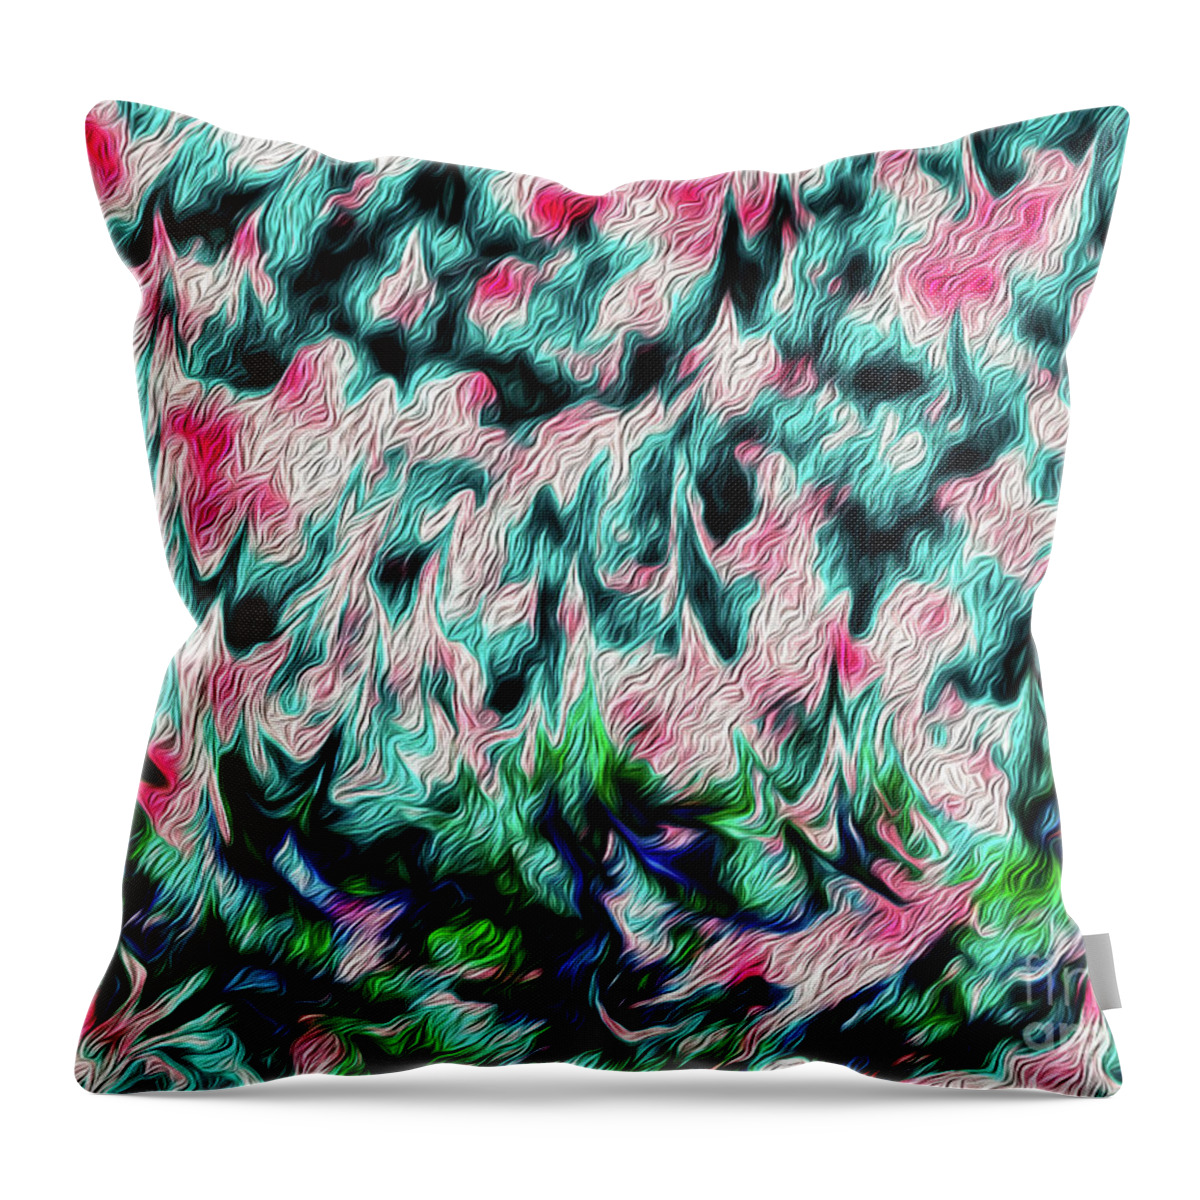 Chaos Throw Pillow featuring the mixed media Chaos by Toni Somes